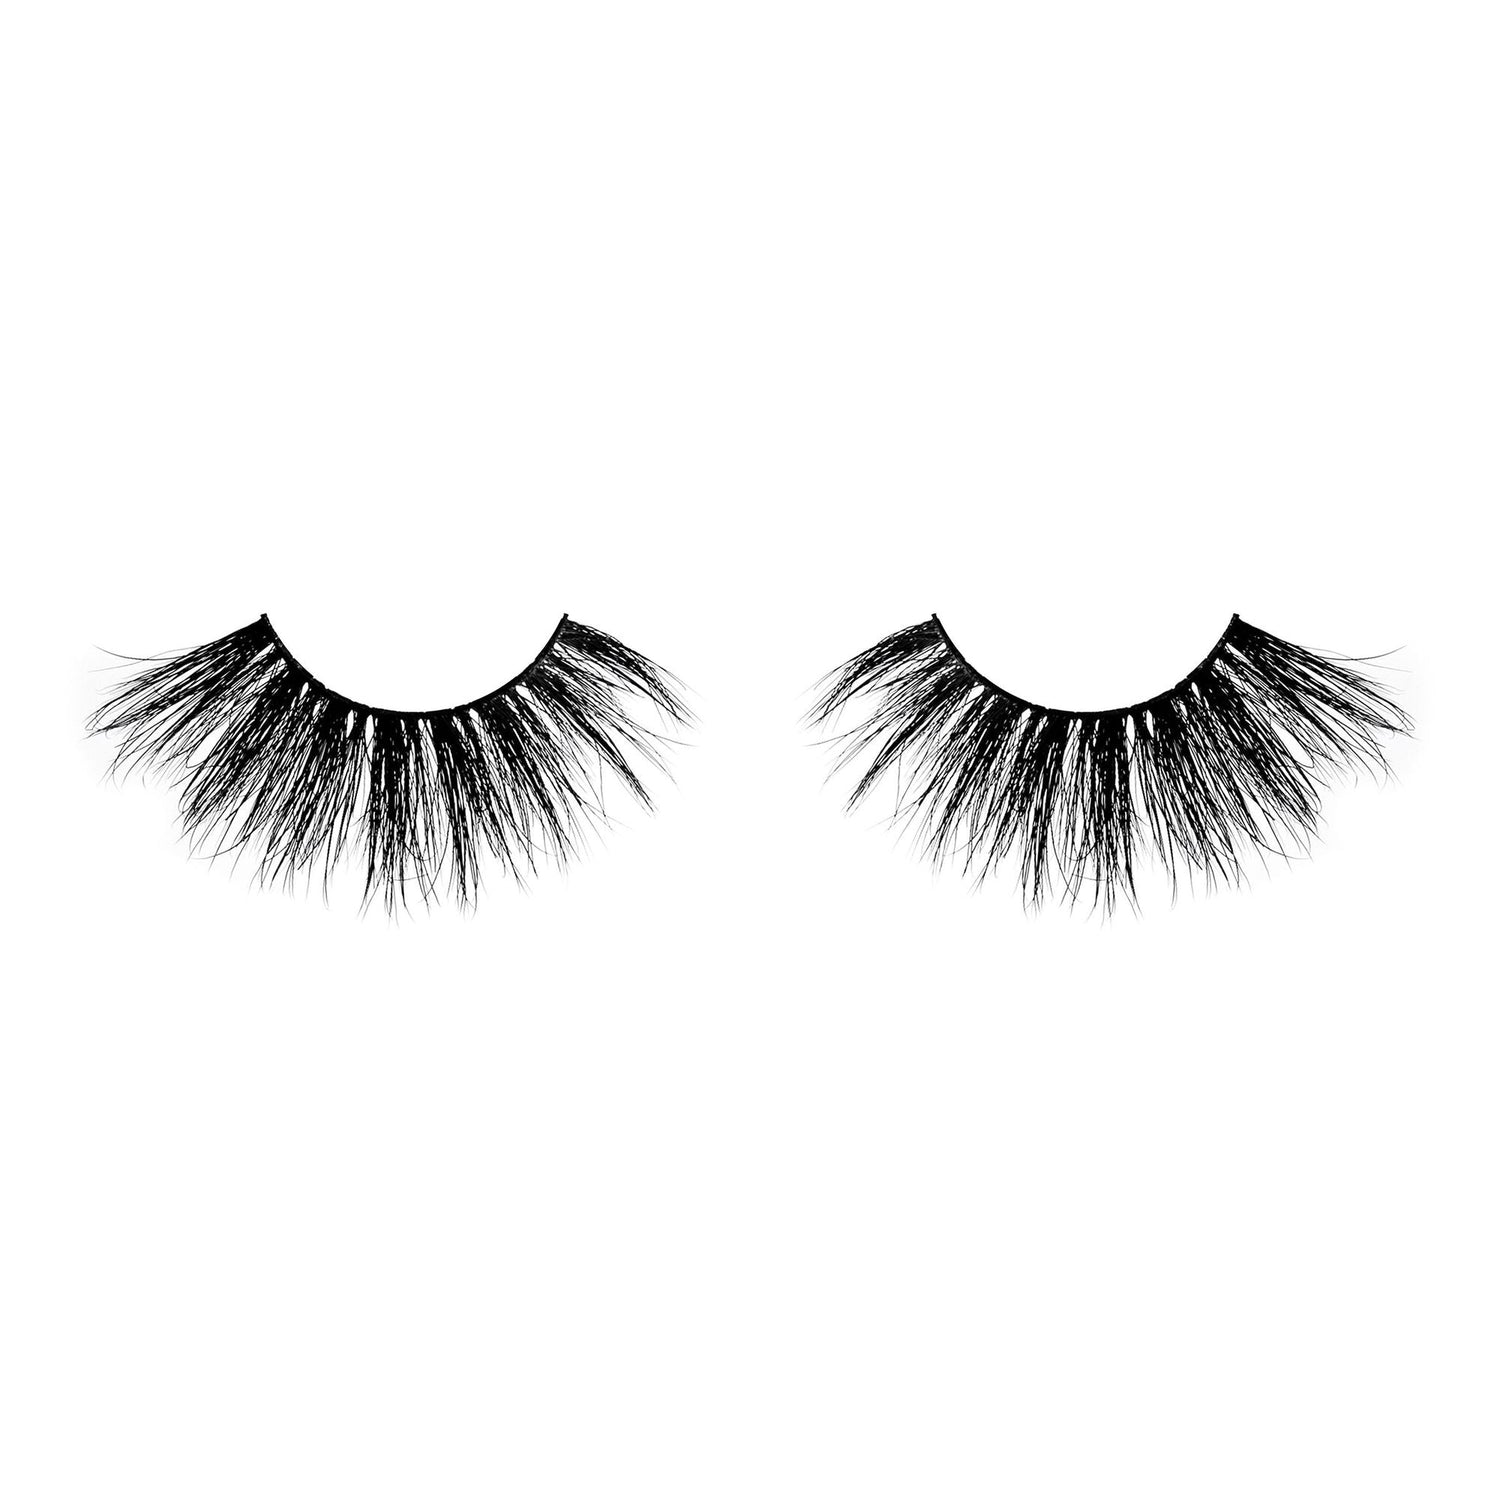 Glamour Us_Beauty Creations_Lashes_BAD HABITS 35 MM Faux Mink Lashes__BC-35MMFL-BH